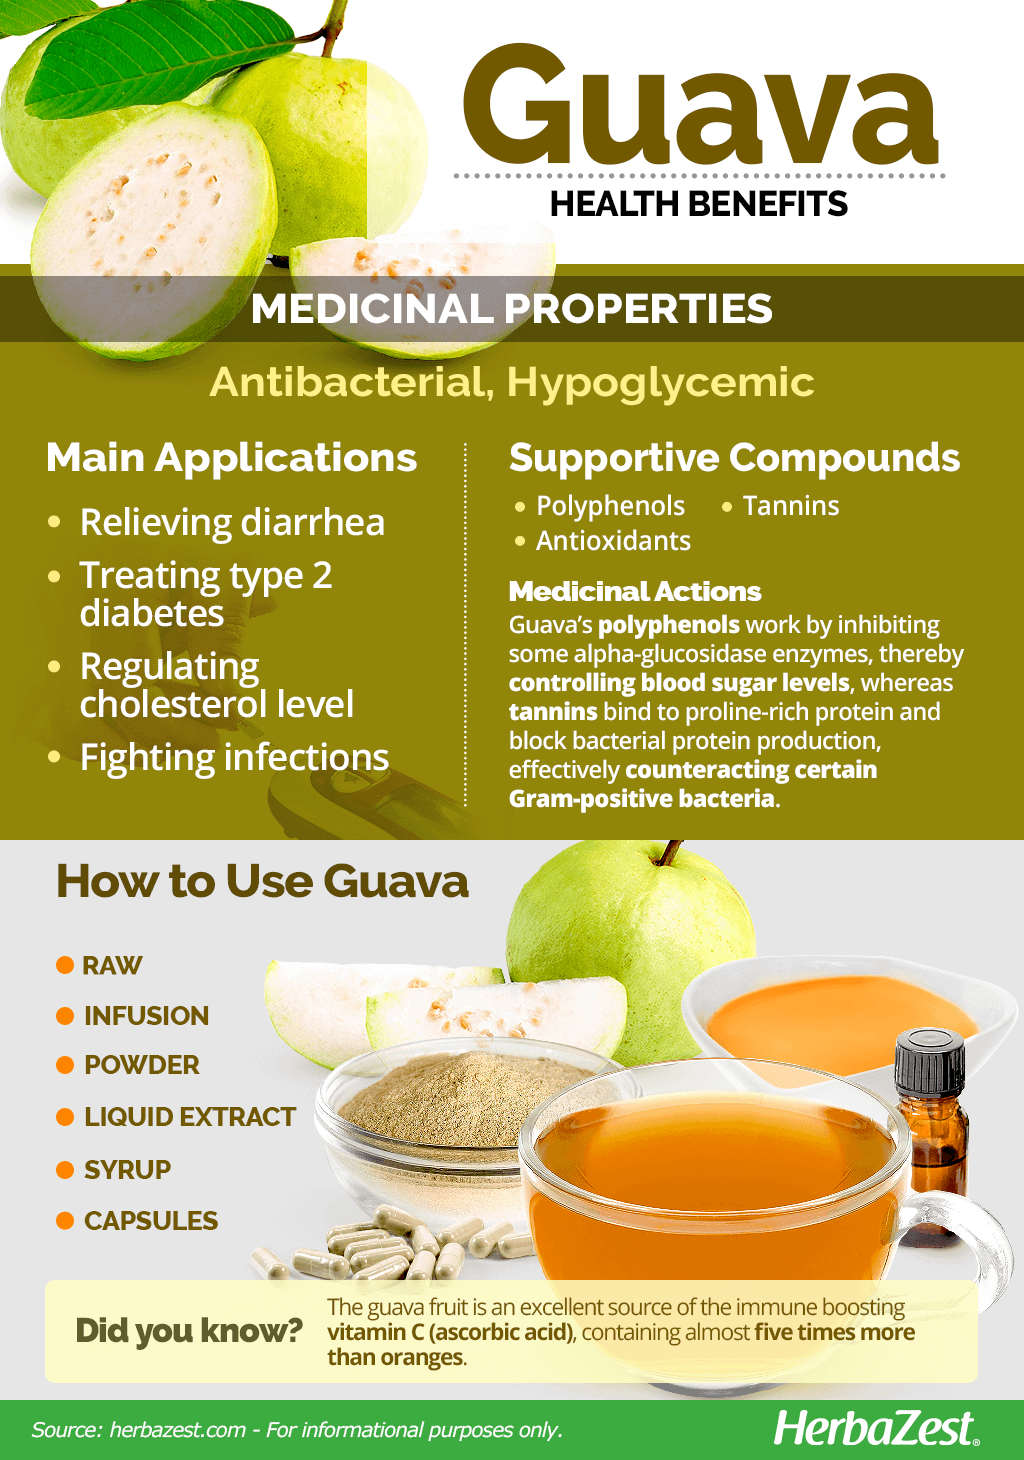 All About Guava